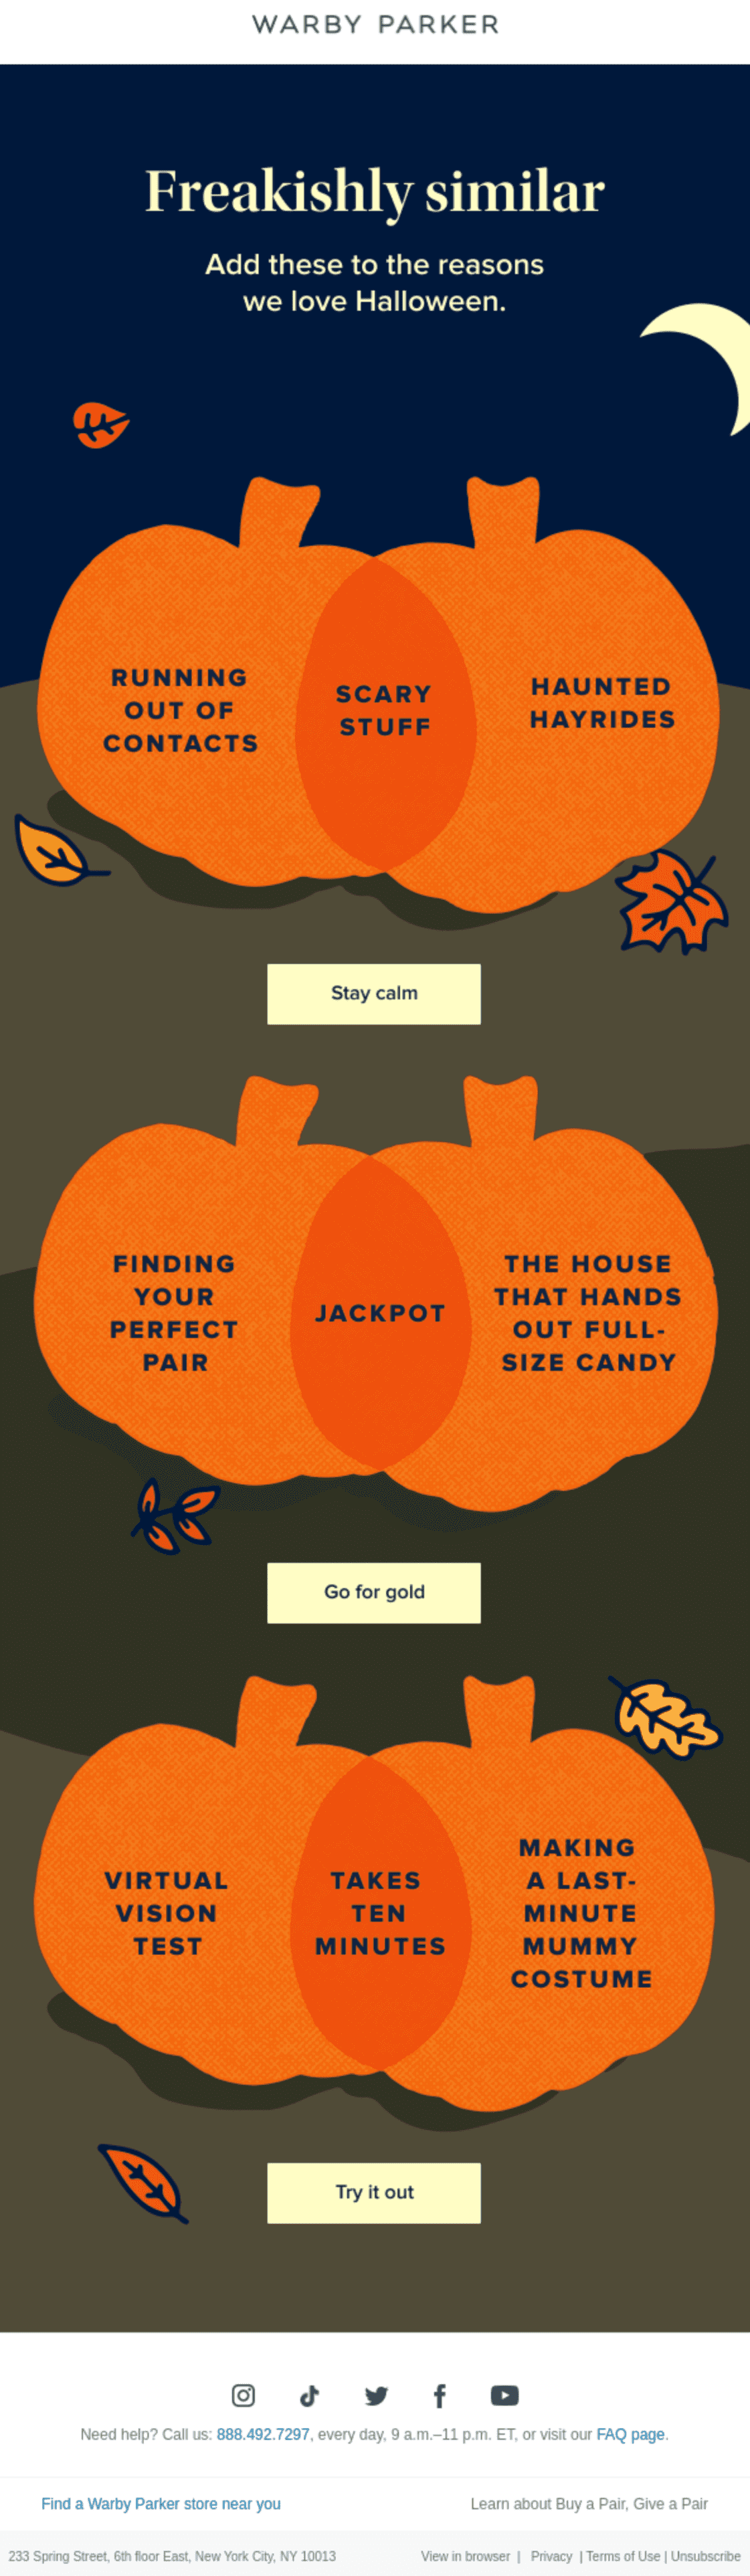 An email with three illustrated pumpkins showing similarities between the brand’s products and services and Halloween-related experiences and activities